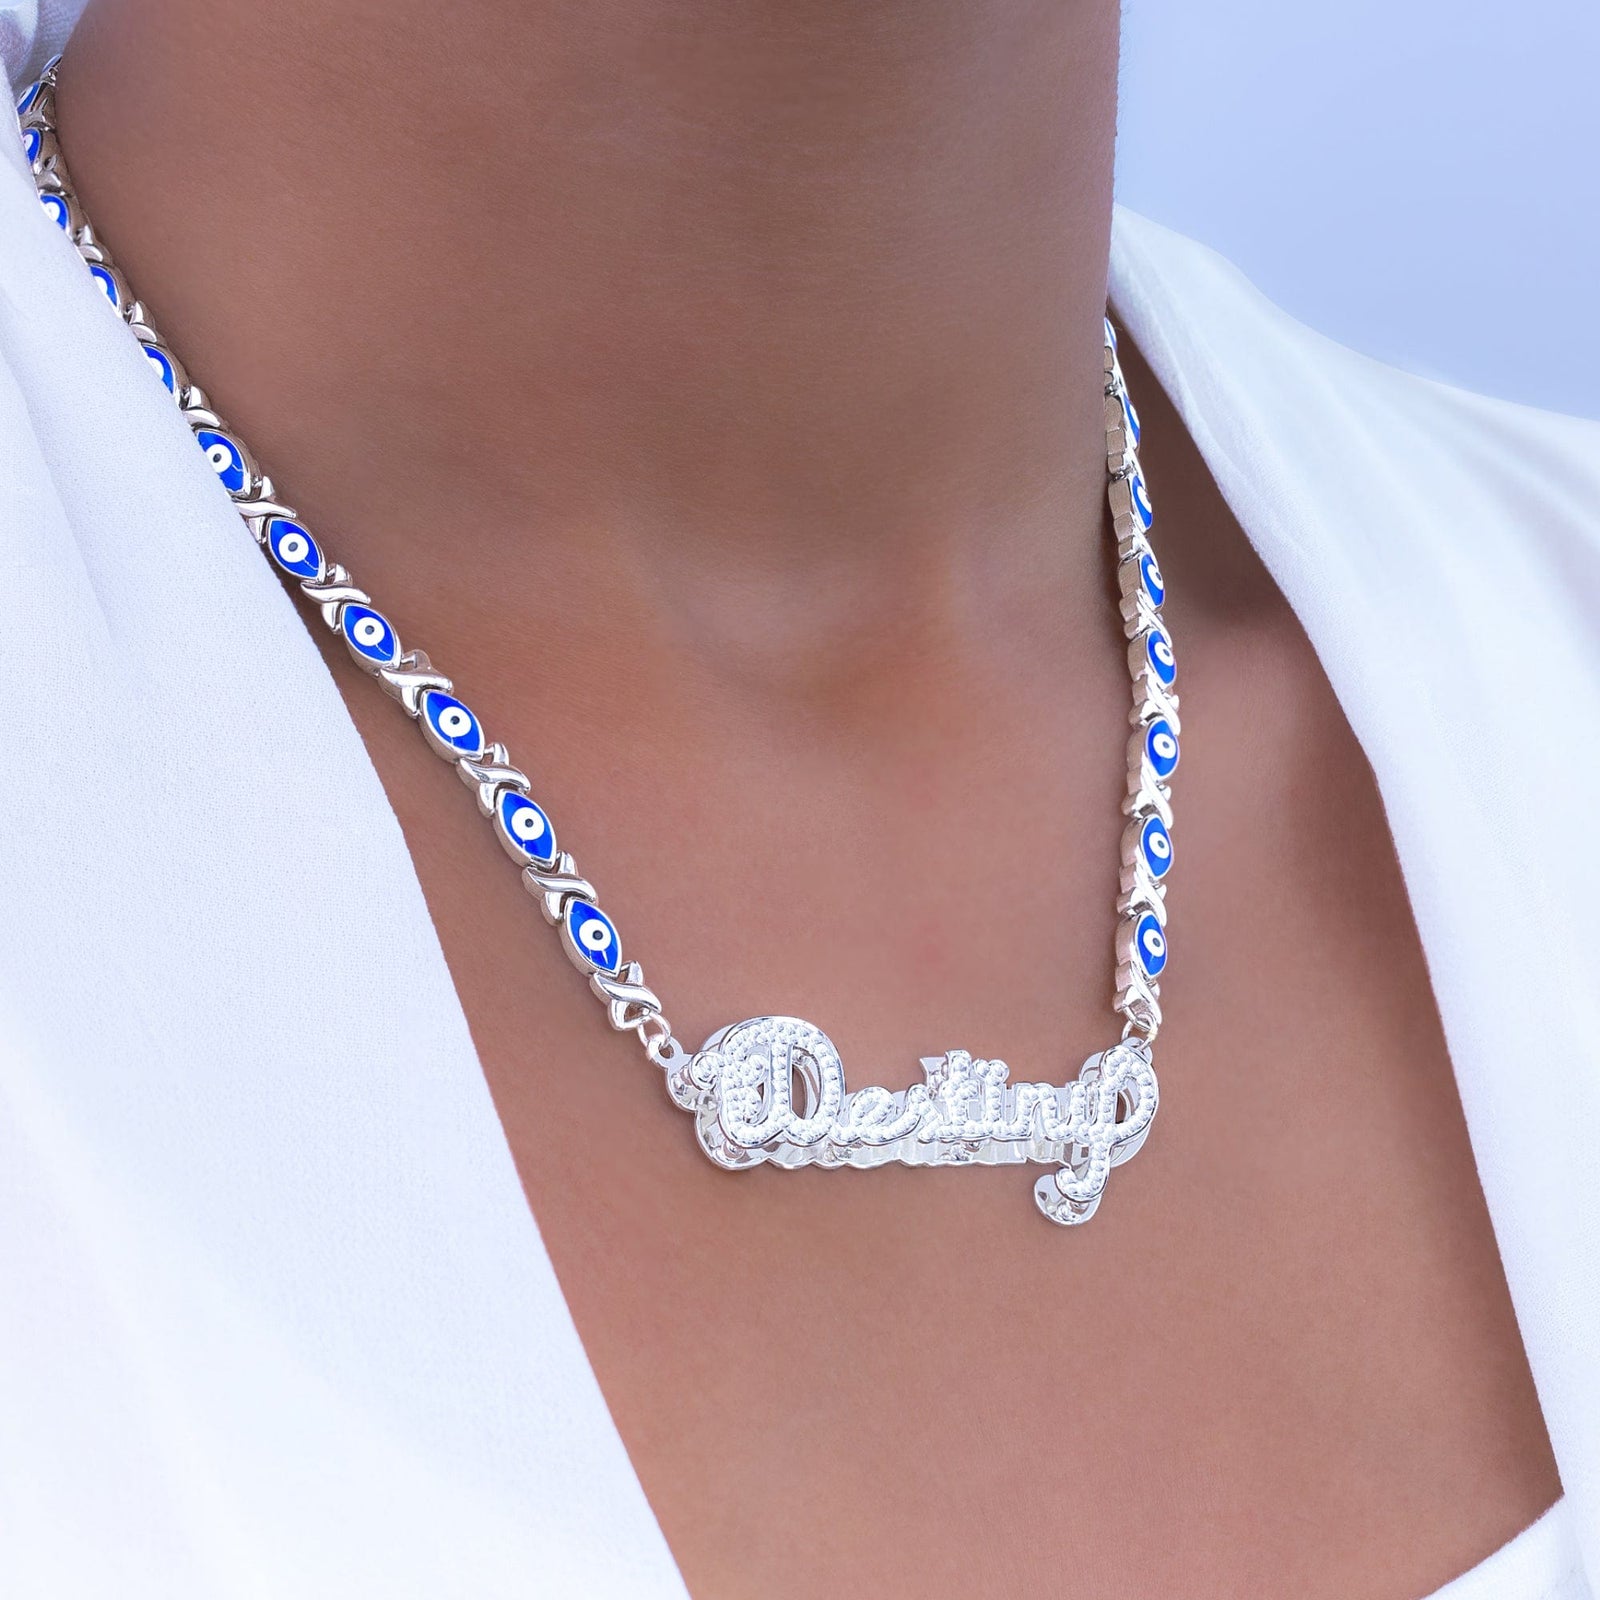 Double Nameplate Necklace w/ Love Birds Hannah 